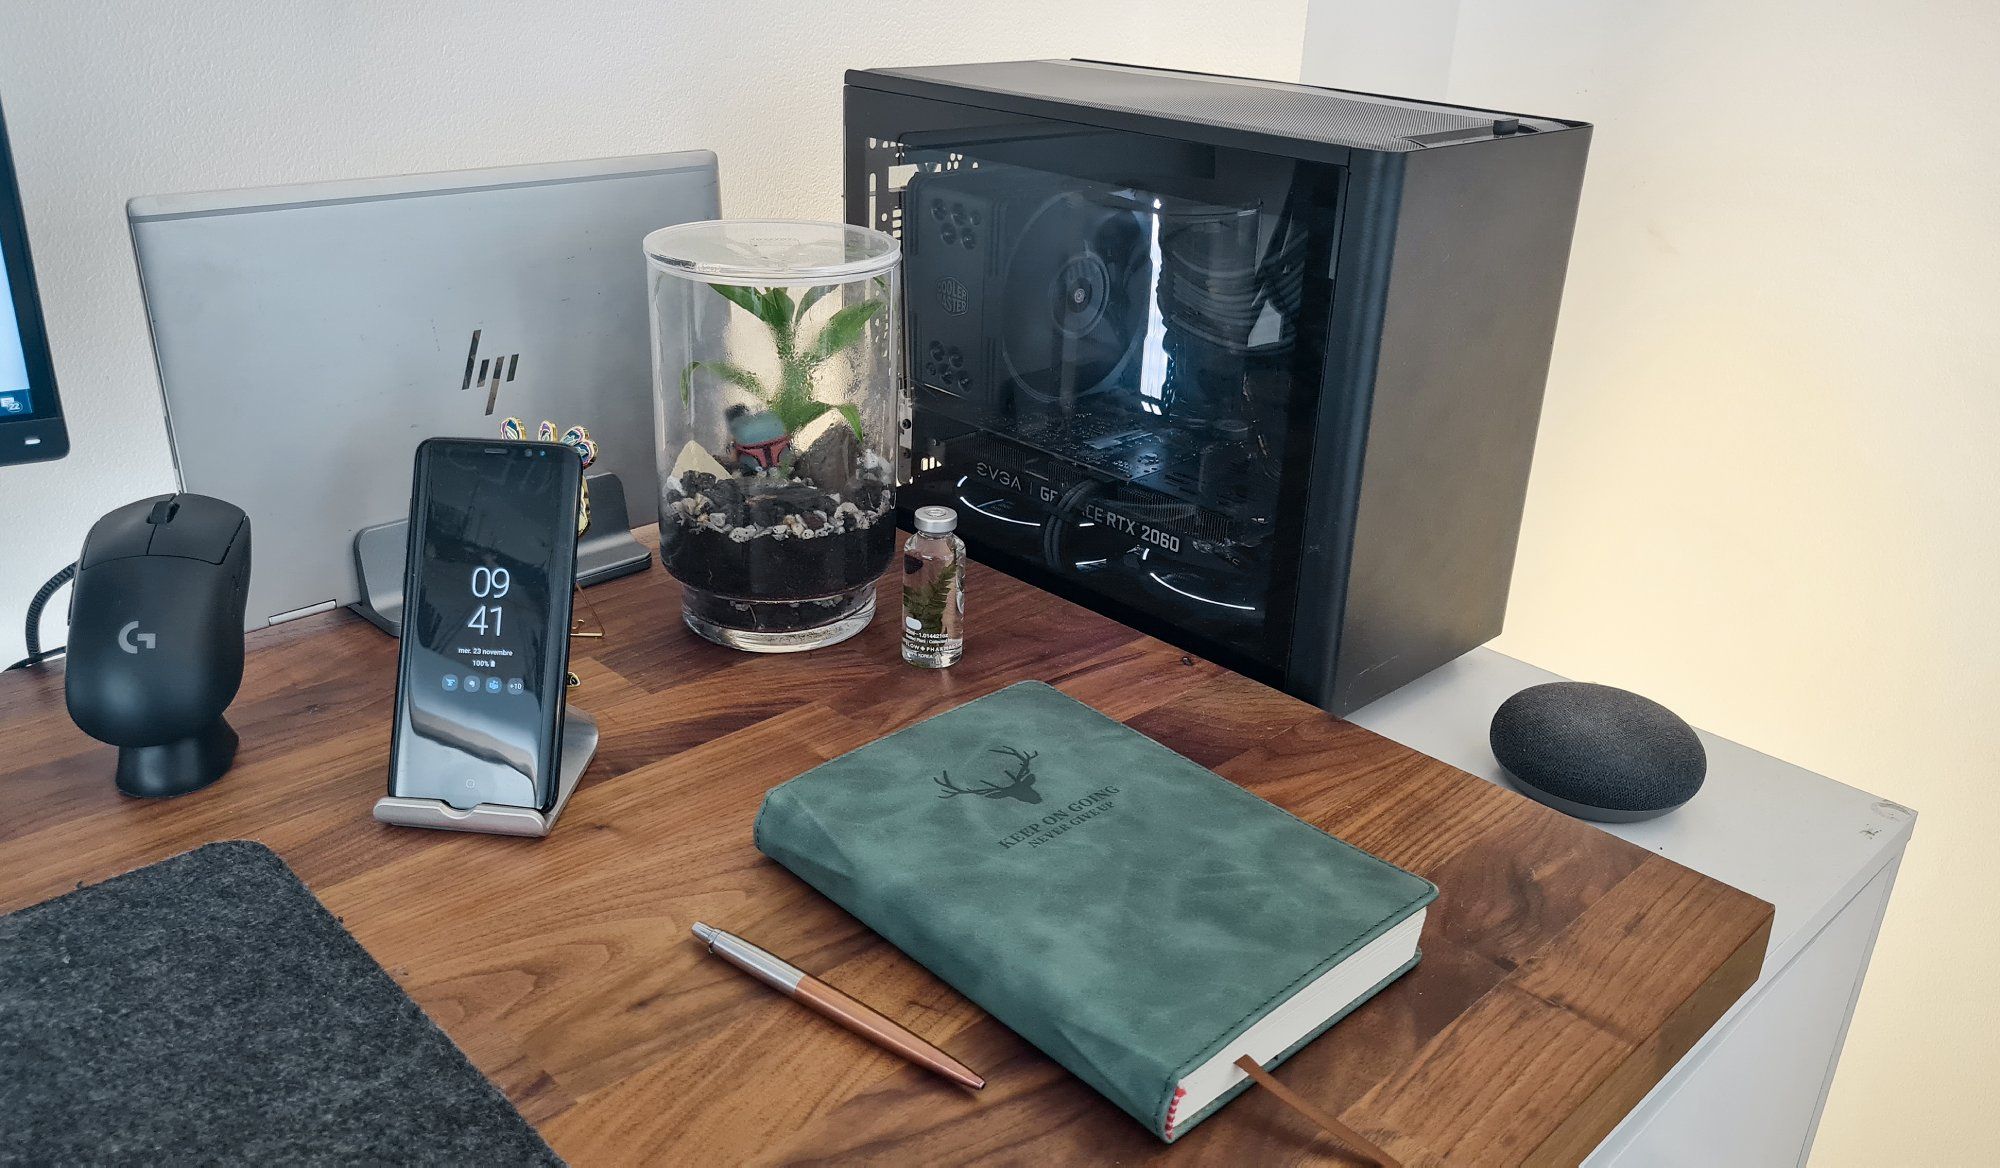 A desk setup featuring a terrarium, notebook, smartphone, laptop, GeForce RTX 2060 graphics card, and mouse